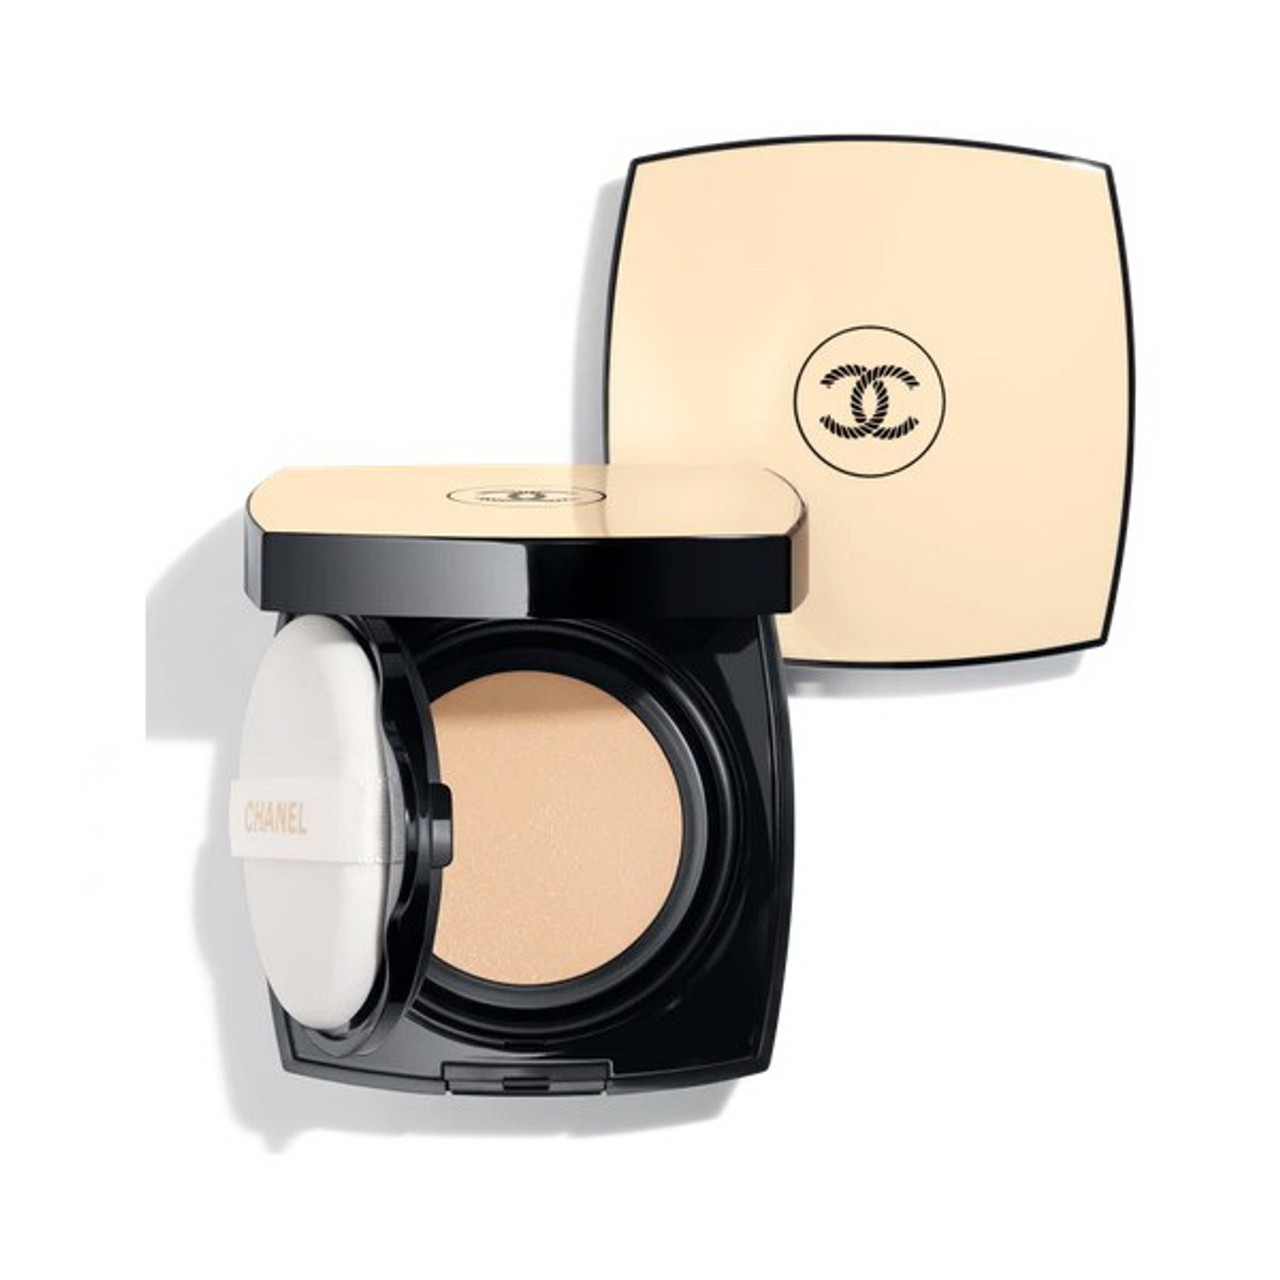 Chanel Les Beiges Healthy Glow Gel Touch Foundation SPF 25 Refill